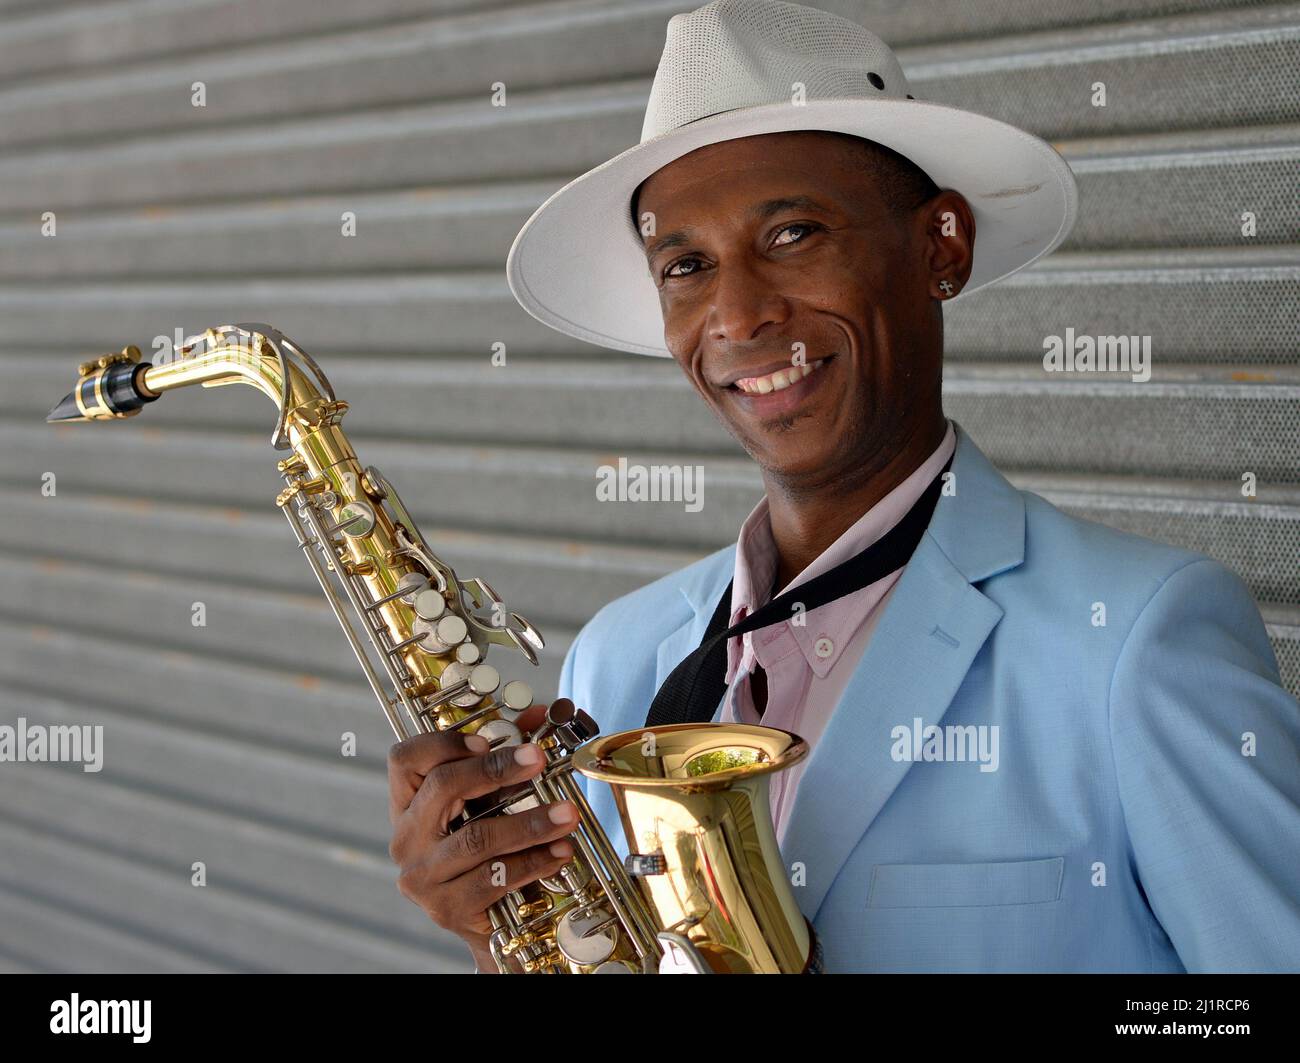 Handsome elegant young Afro-Cuban saxophonist with white Panama hat holds his shiny polished saxophone and smiles for the viewer. Stock Photo